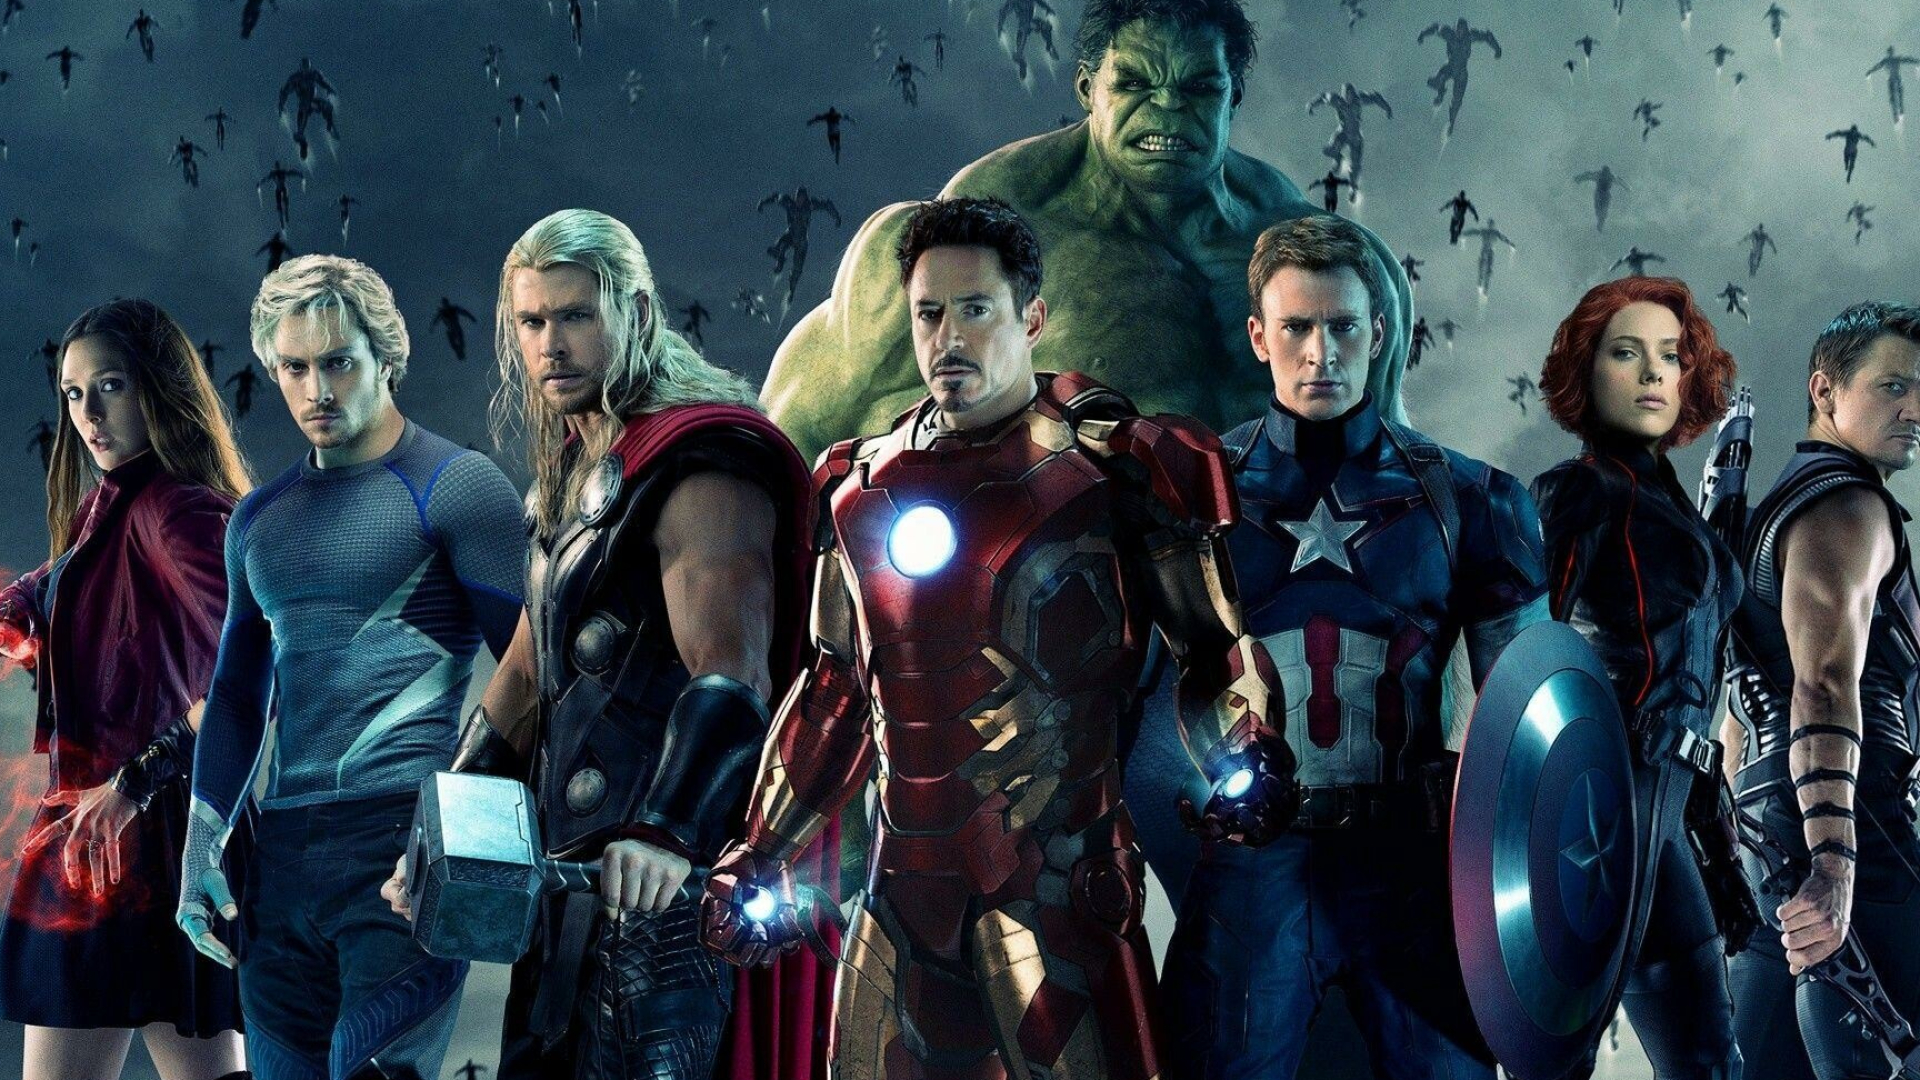 Avengers: Marvel characters, Action films, Sci-fi. 1920x1080 Full HD Background.